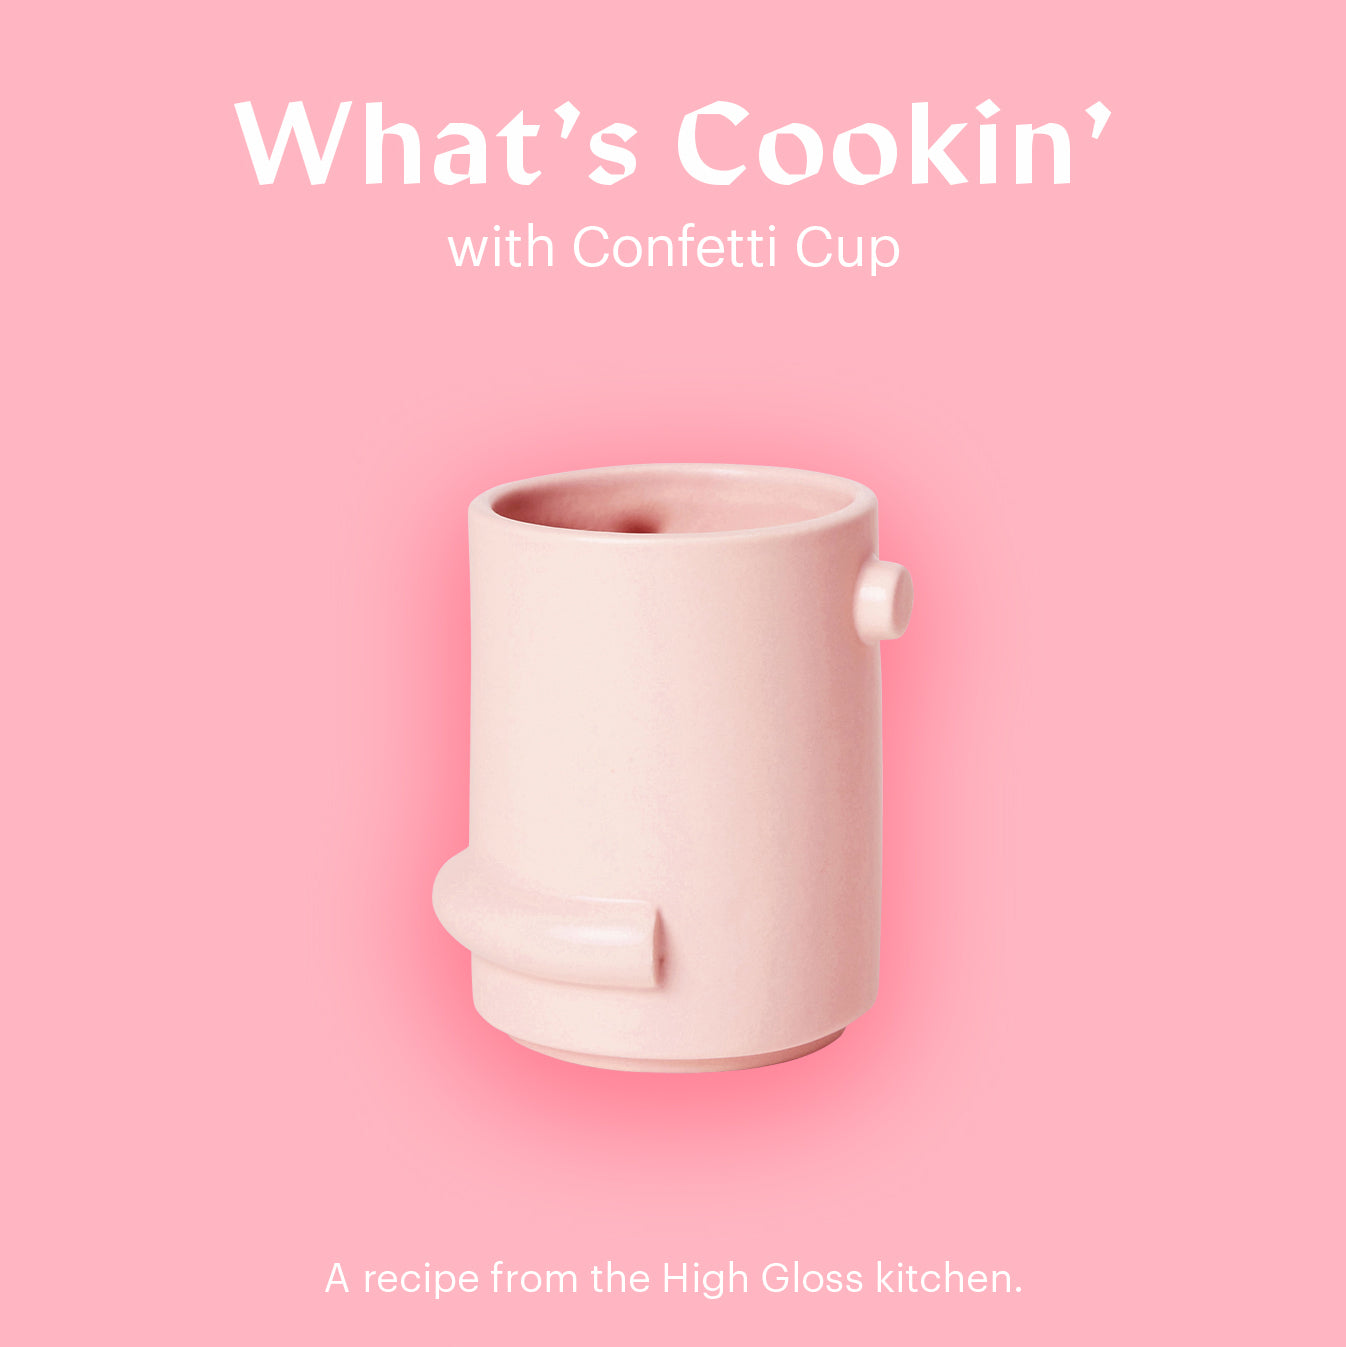 What's Cookin' with Confetti Cup